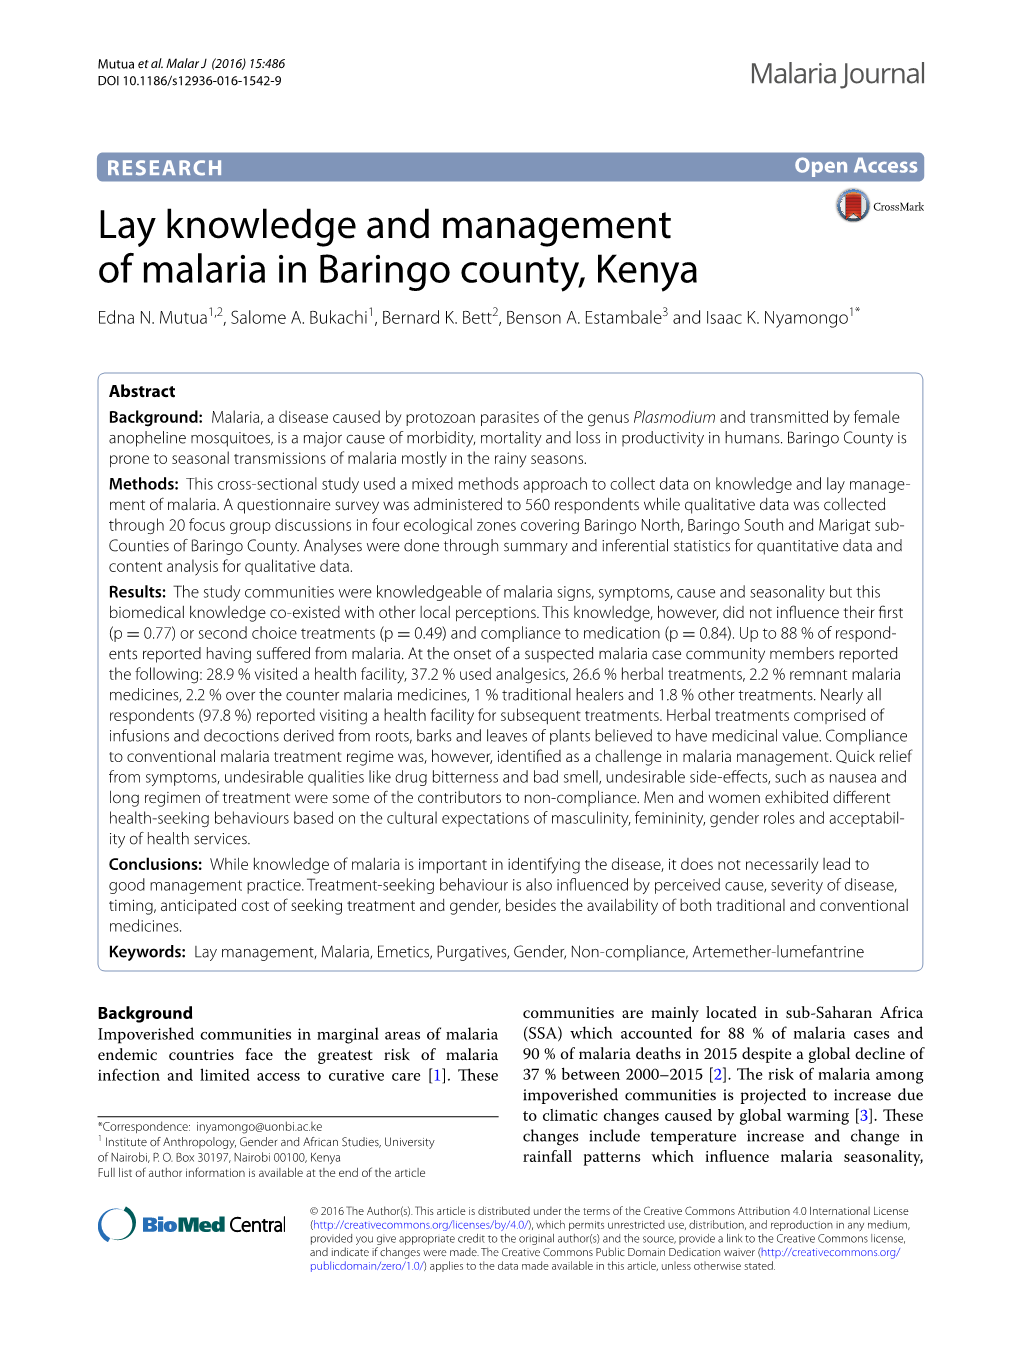 Lay Knowledge and Management of Malaria in Baringo County, Kenya Edna N